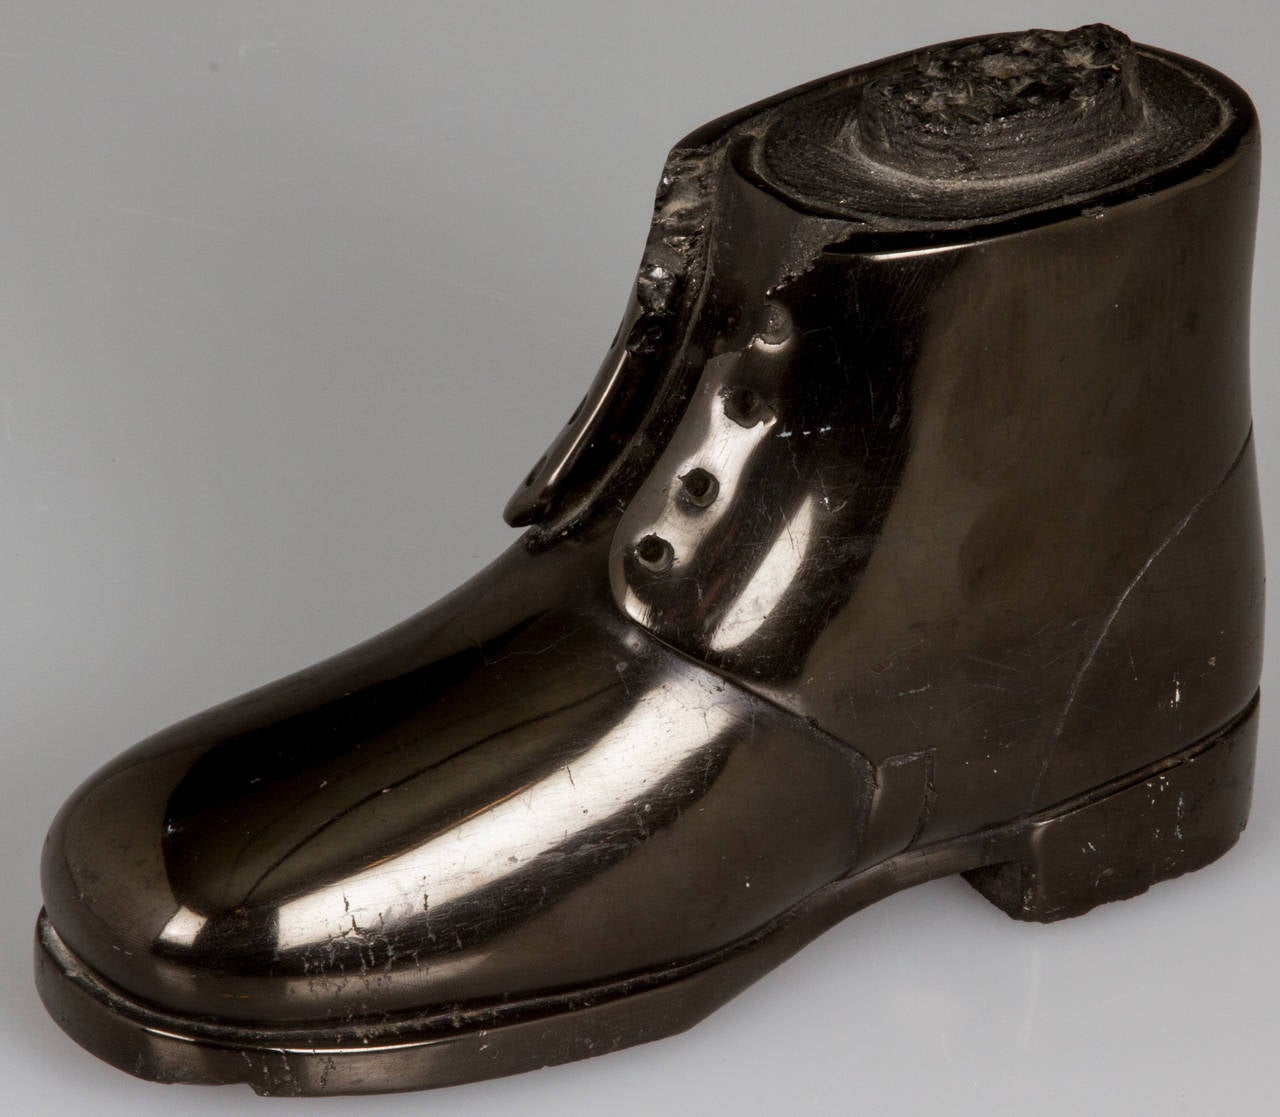 This is a wonderful example of a boot carved out of coal and honed smooth and beautifully detailed. This example is possibly Scottish.